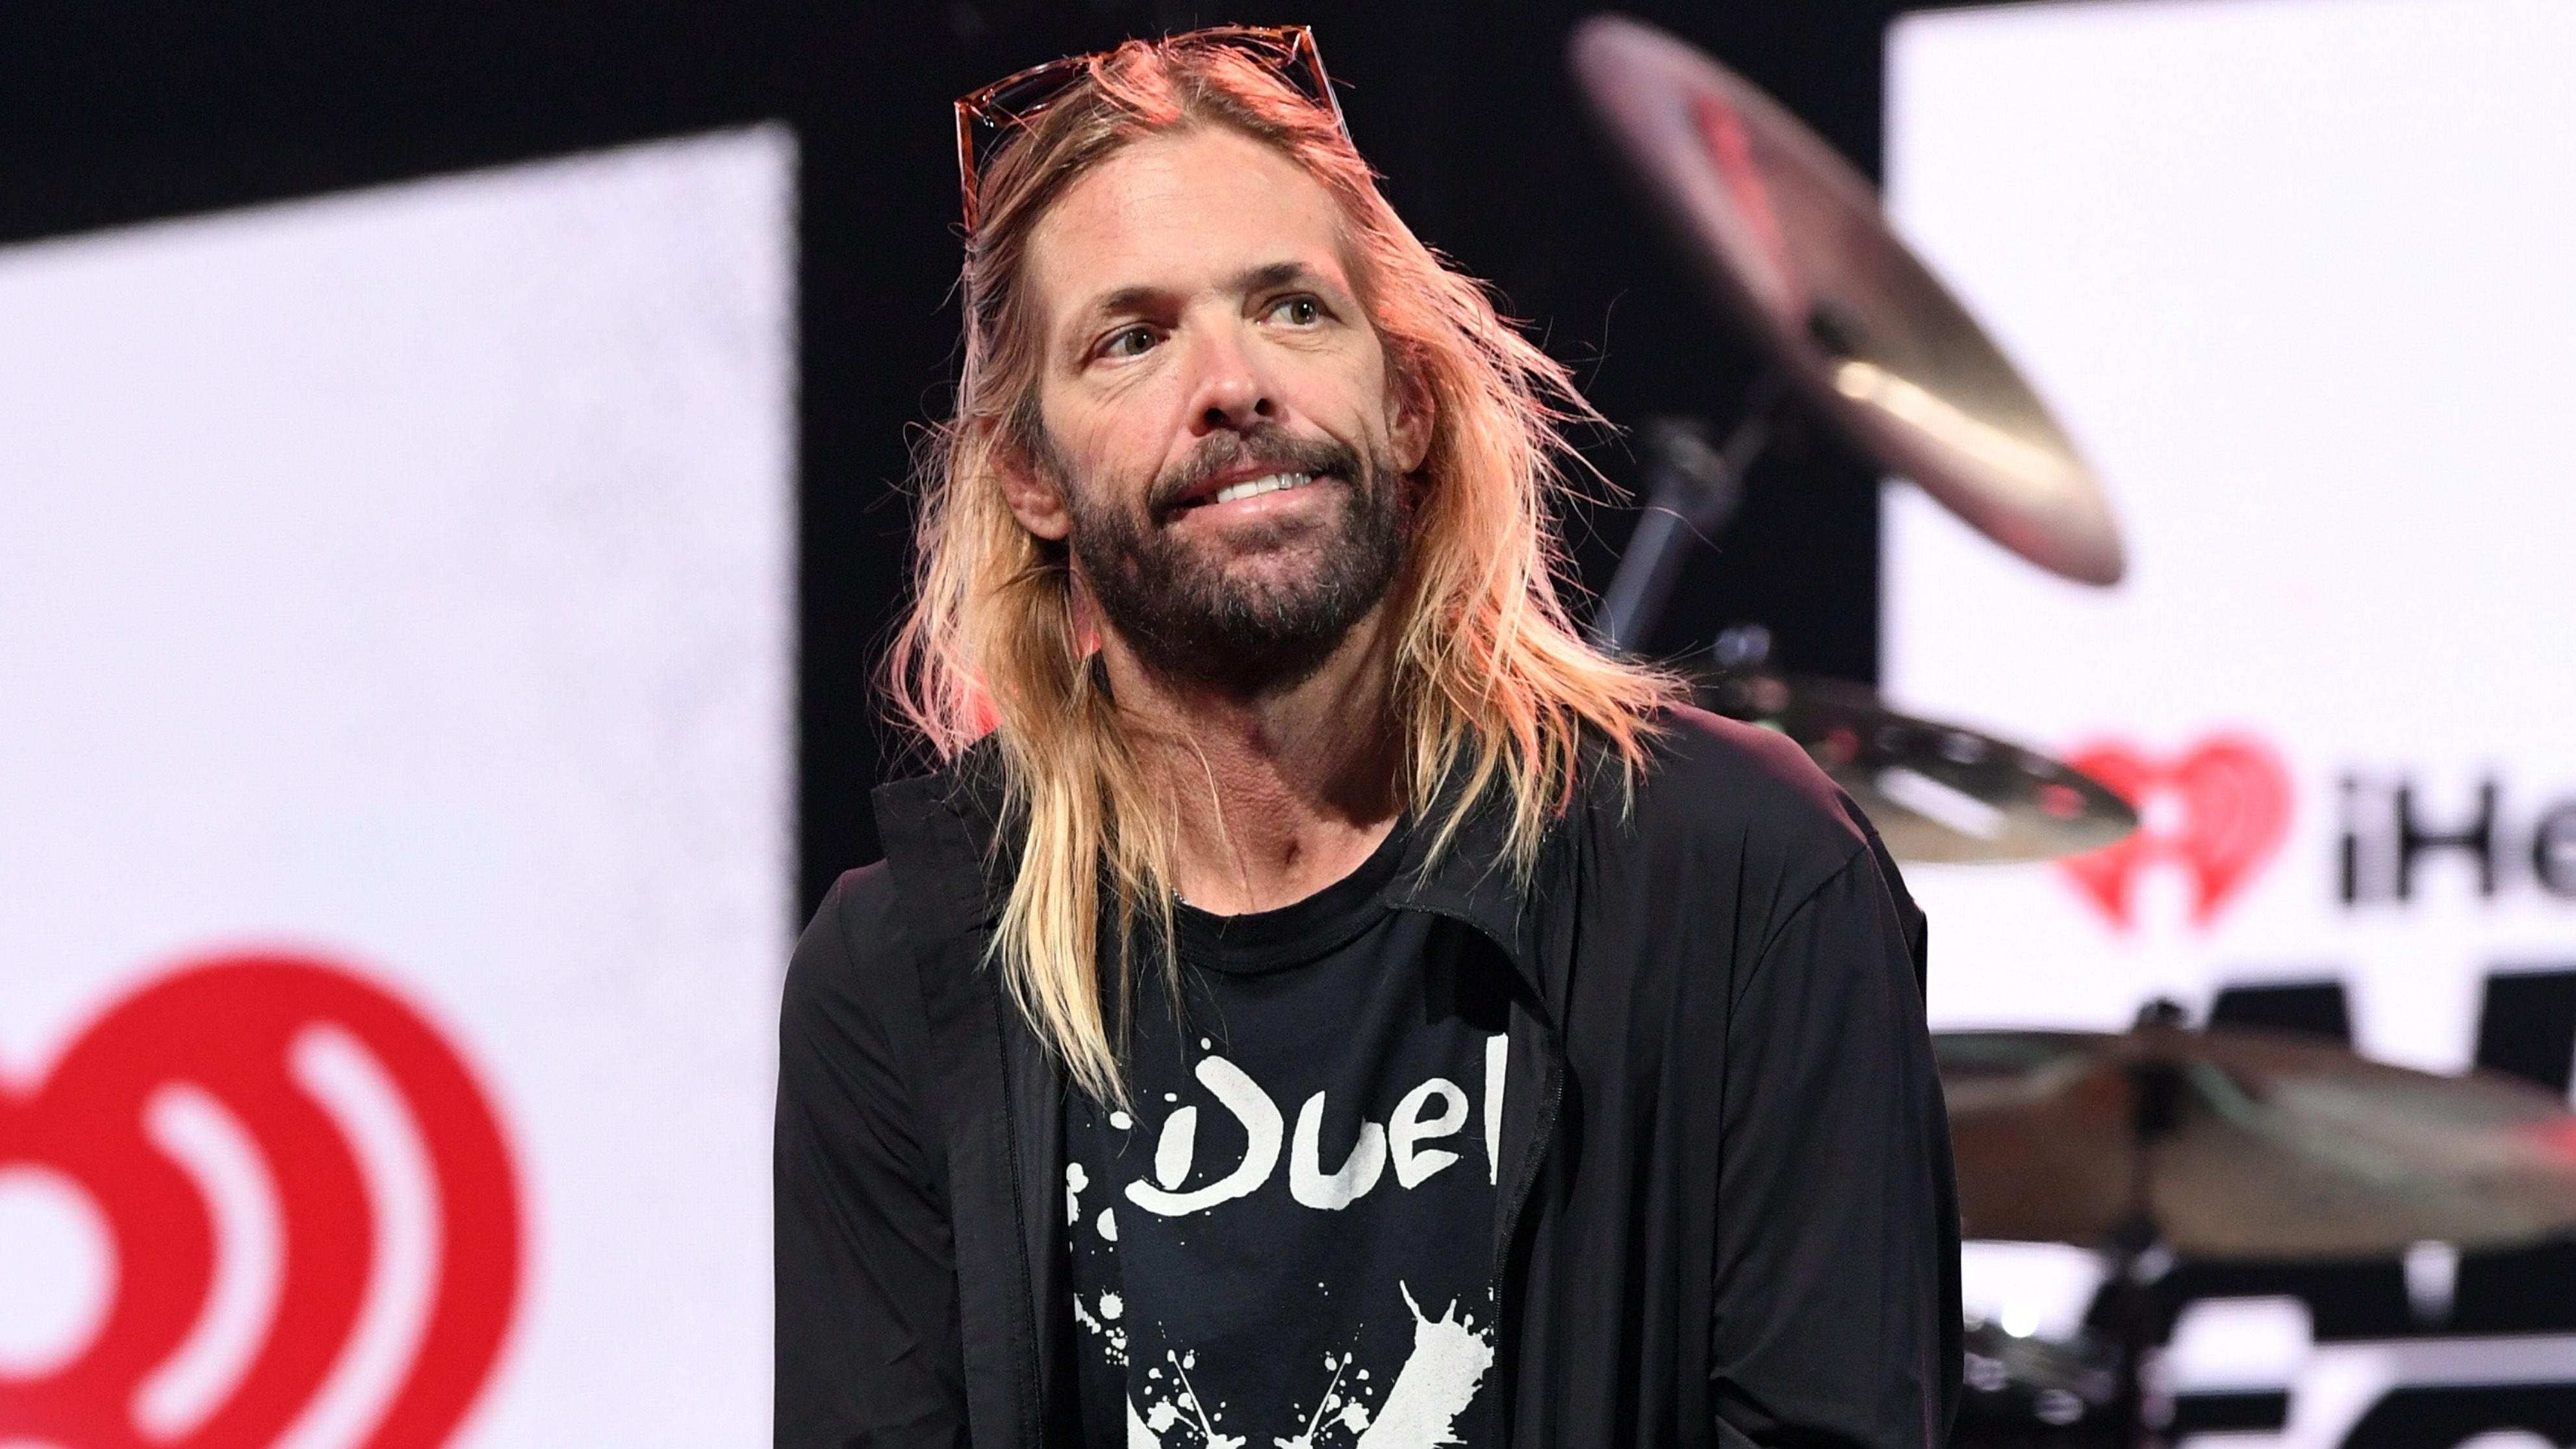 Foo Fighters cancel tour dates in light of drummer Taylor Hawkins’ death